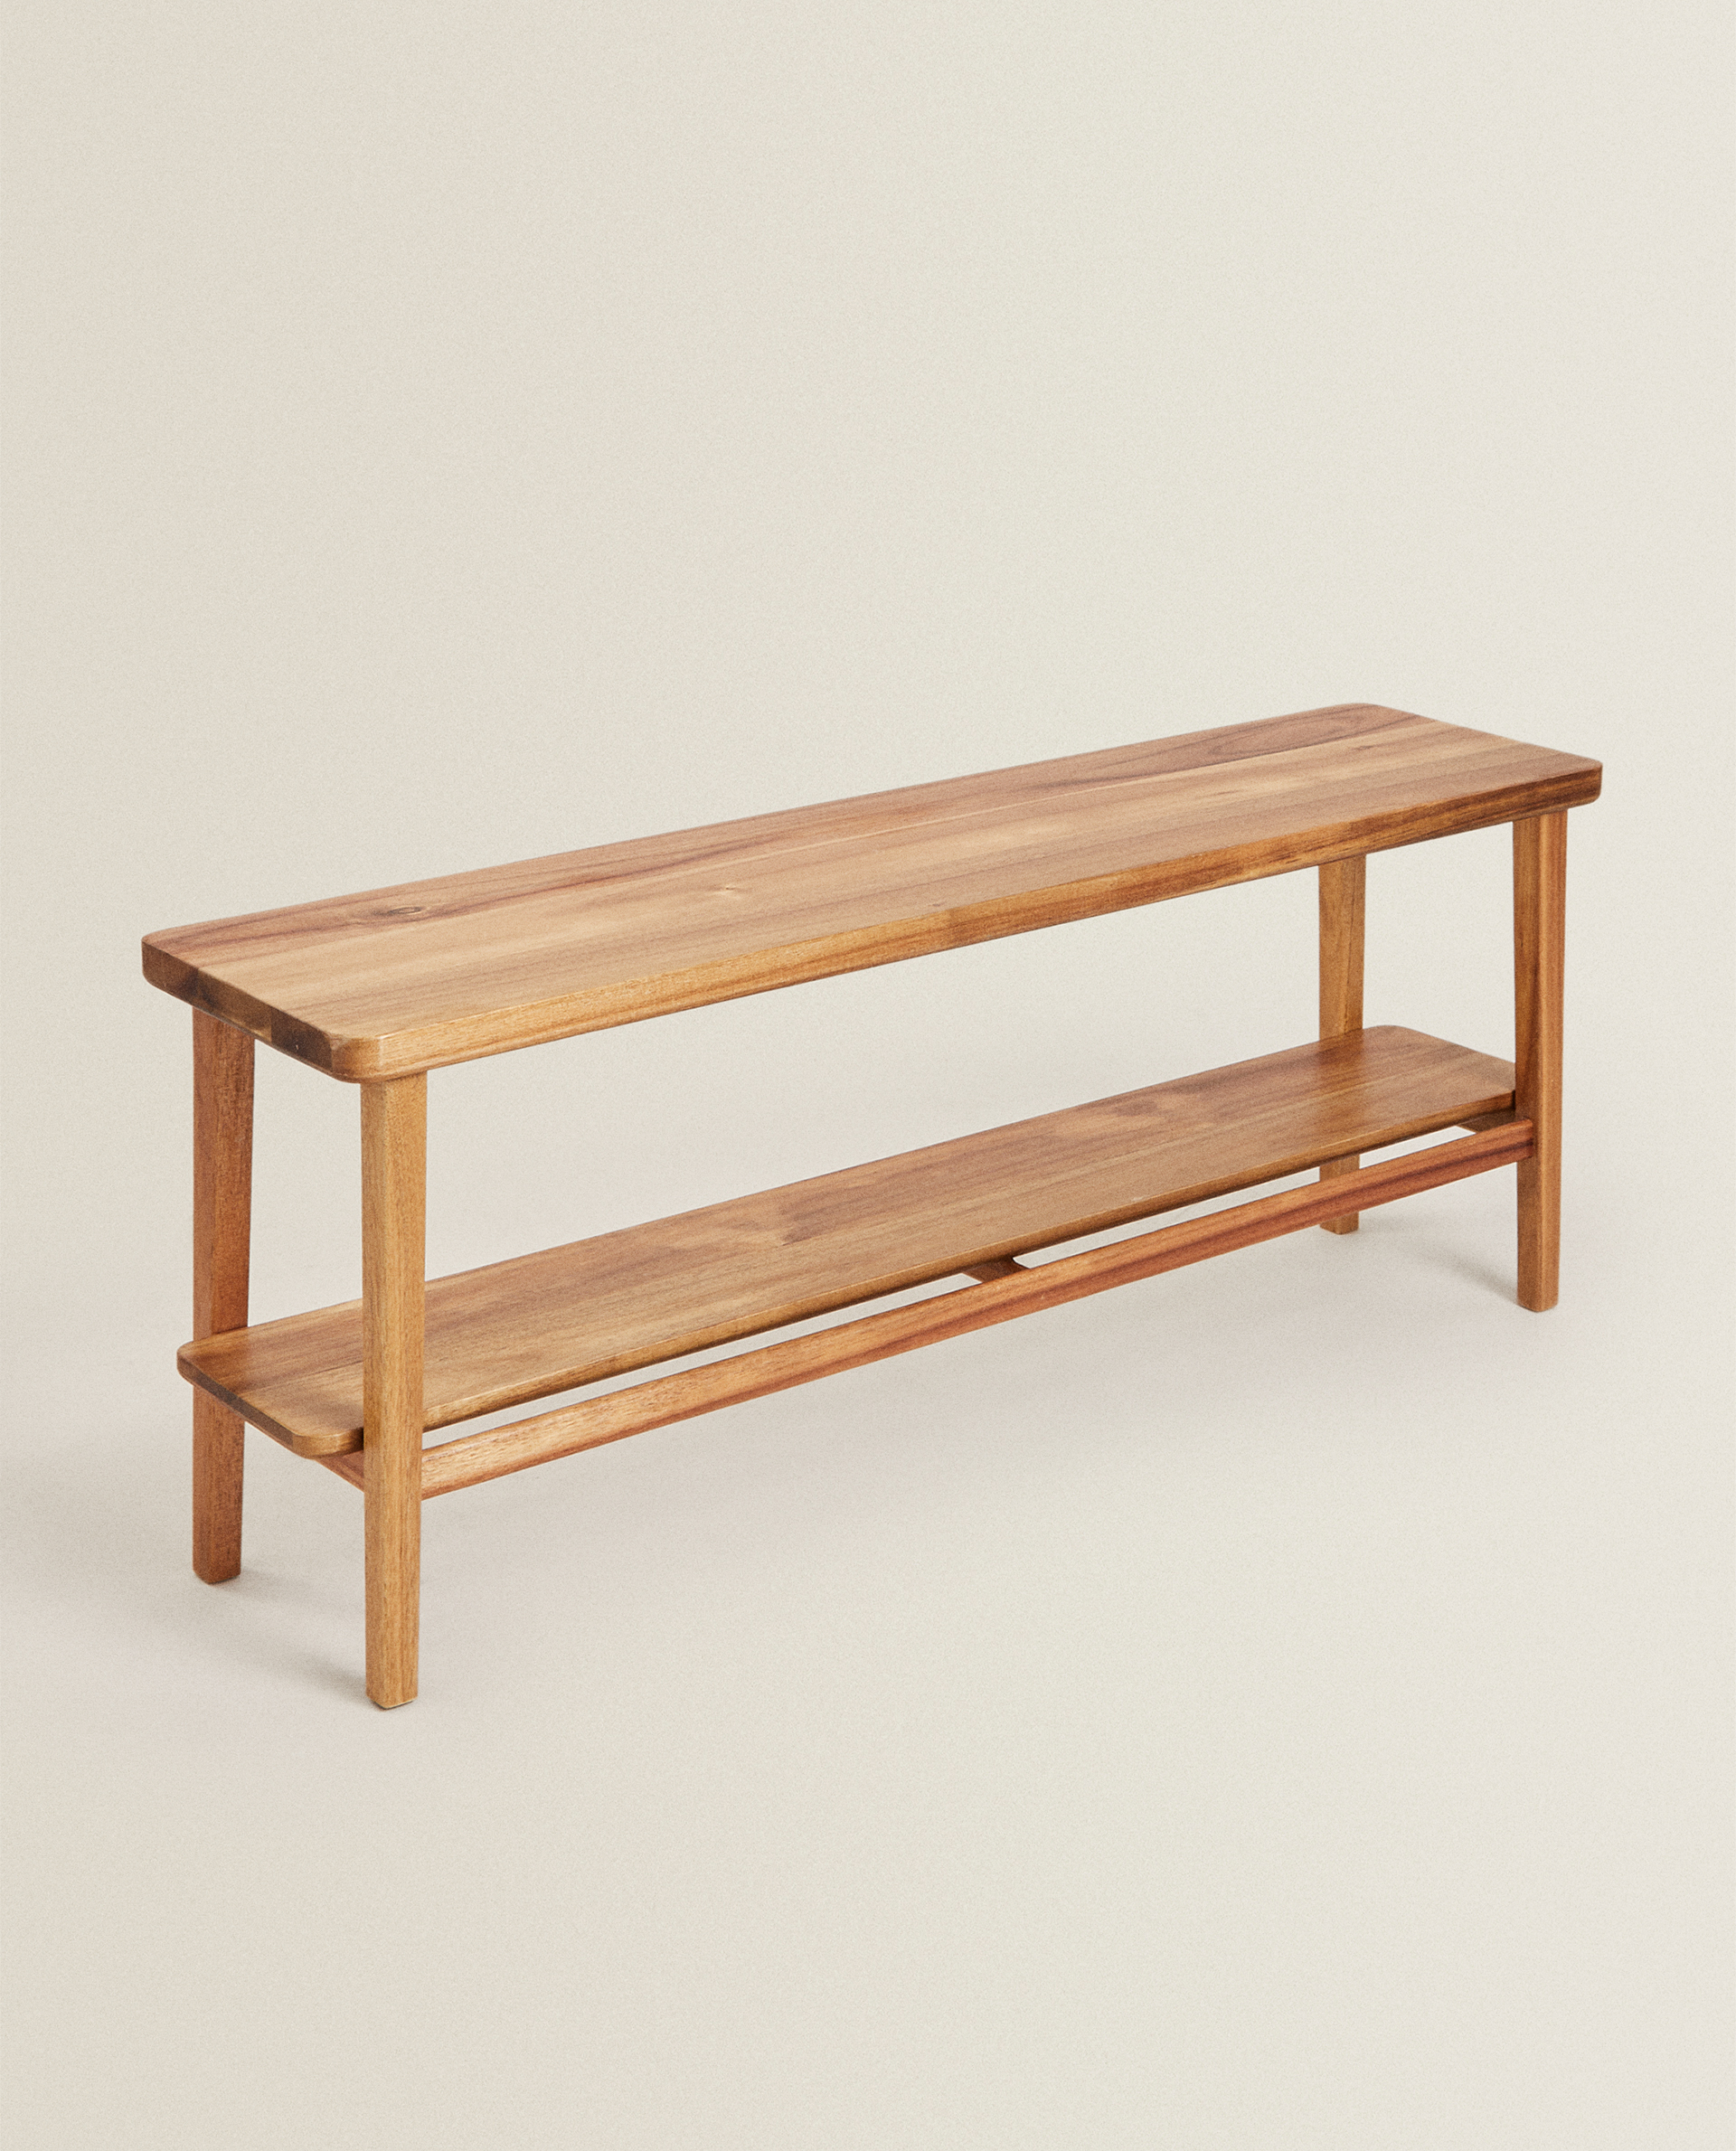 Long Acacia Wood Bench Laundry Care Kitchen New Aw21 Collection Zara Home